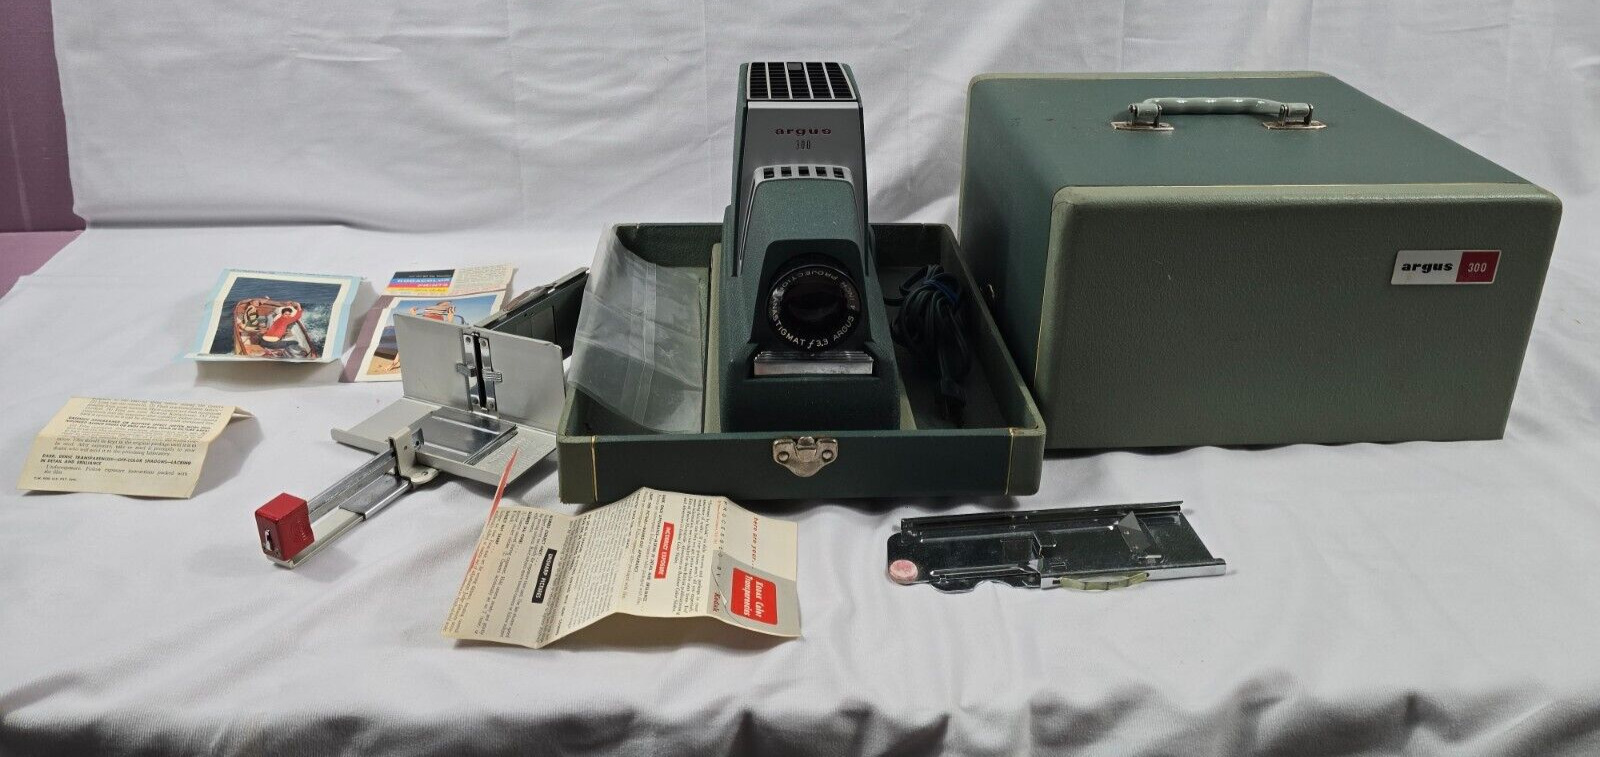 ARGUS 300 VINTAGE LIGHTED SLIDE PROJECTOR WITH CASE - Tested And Working